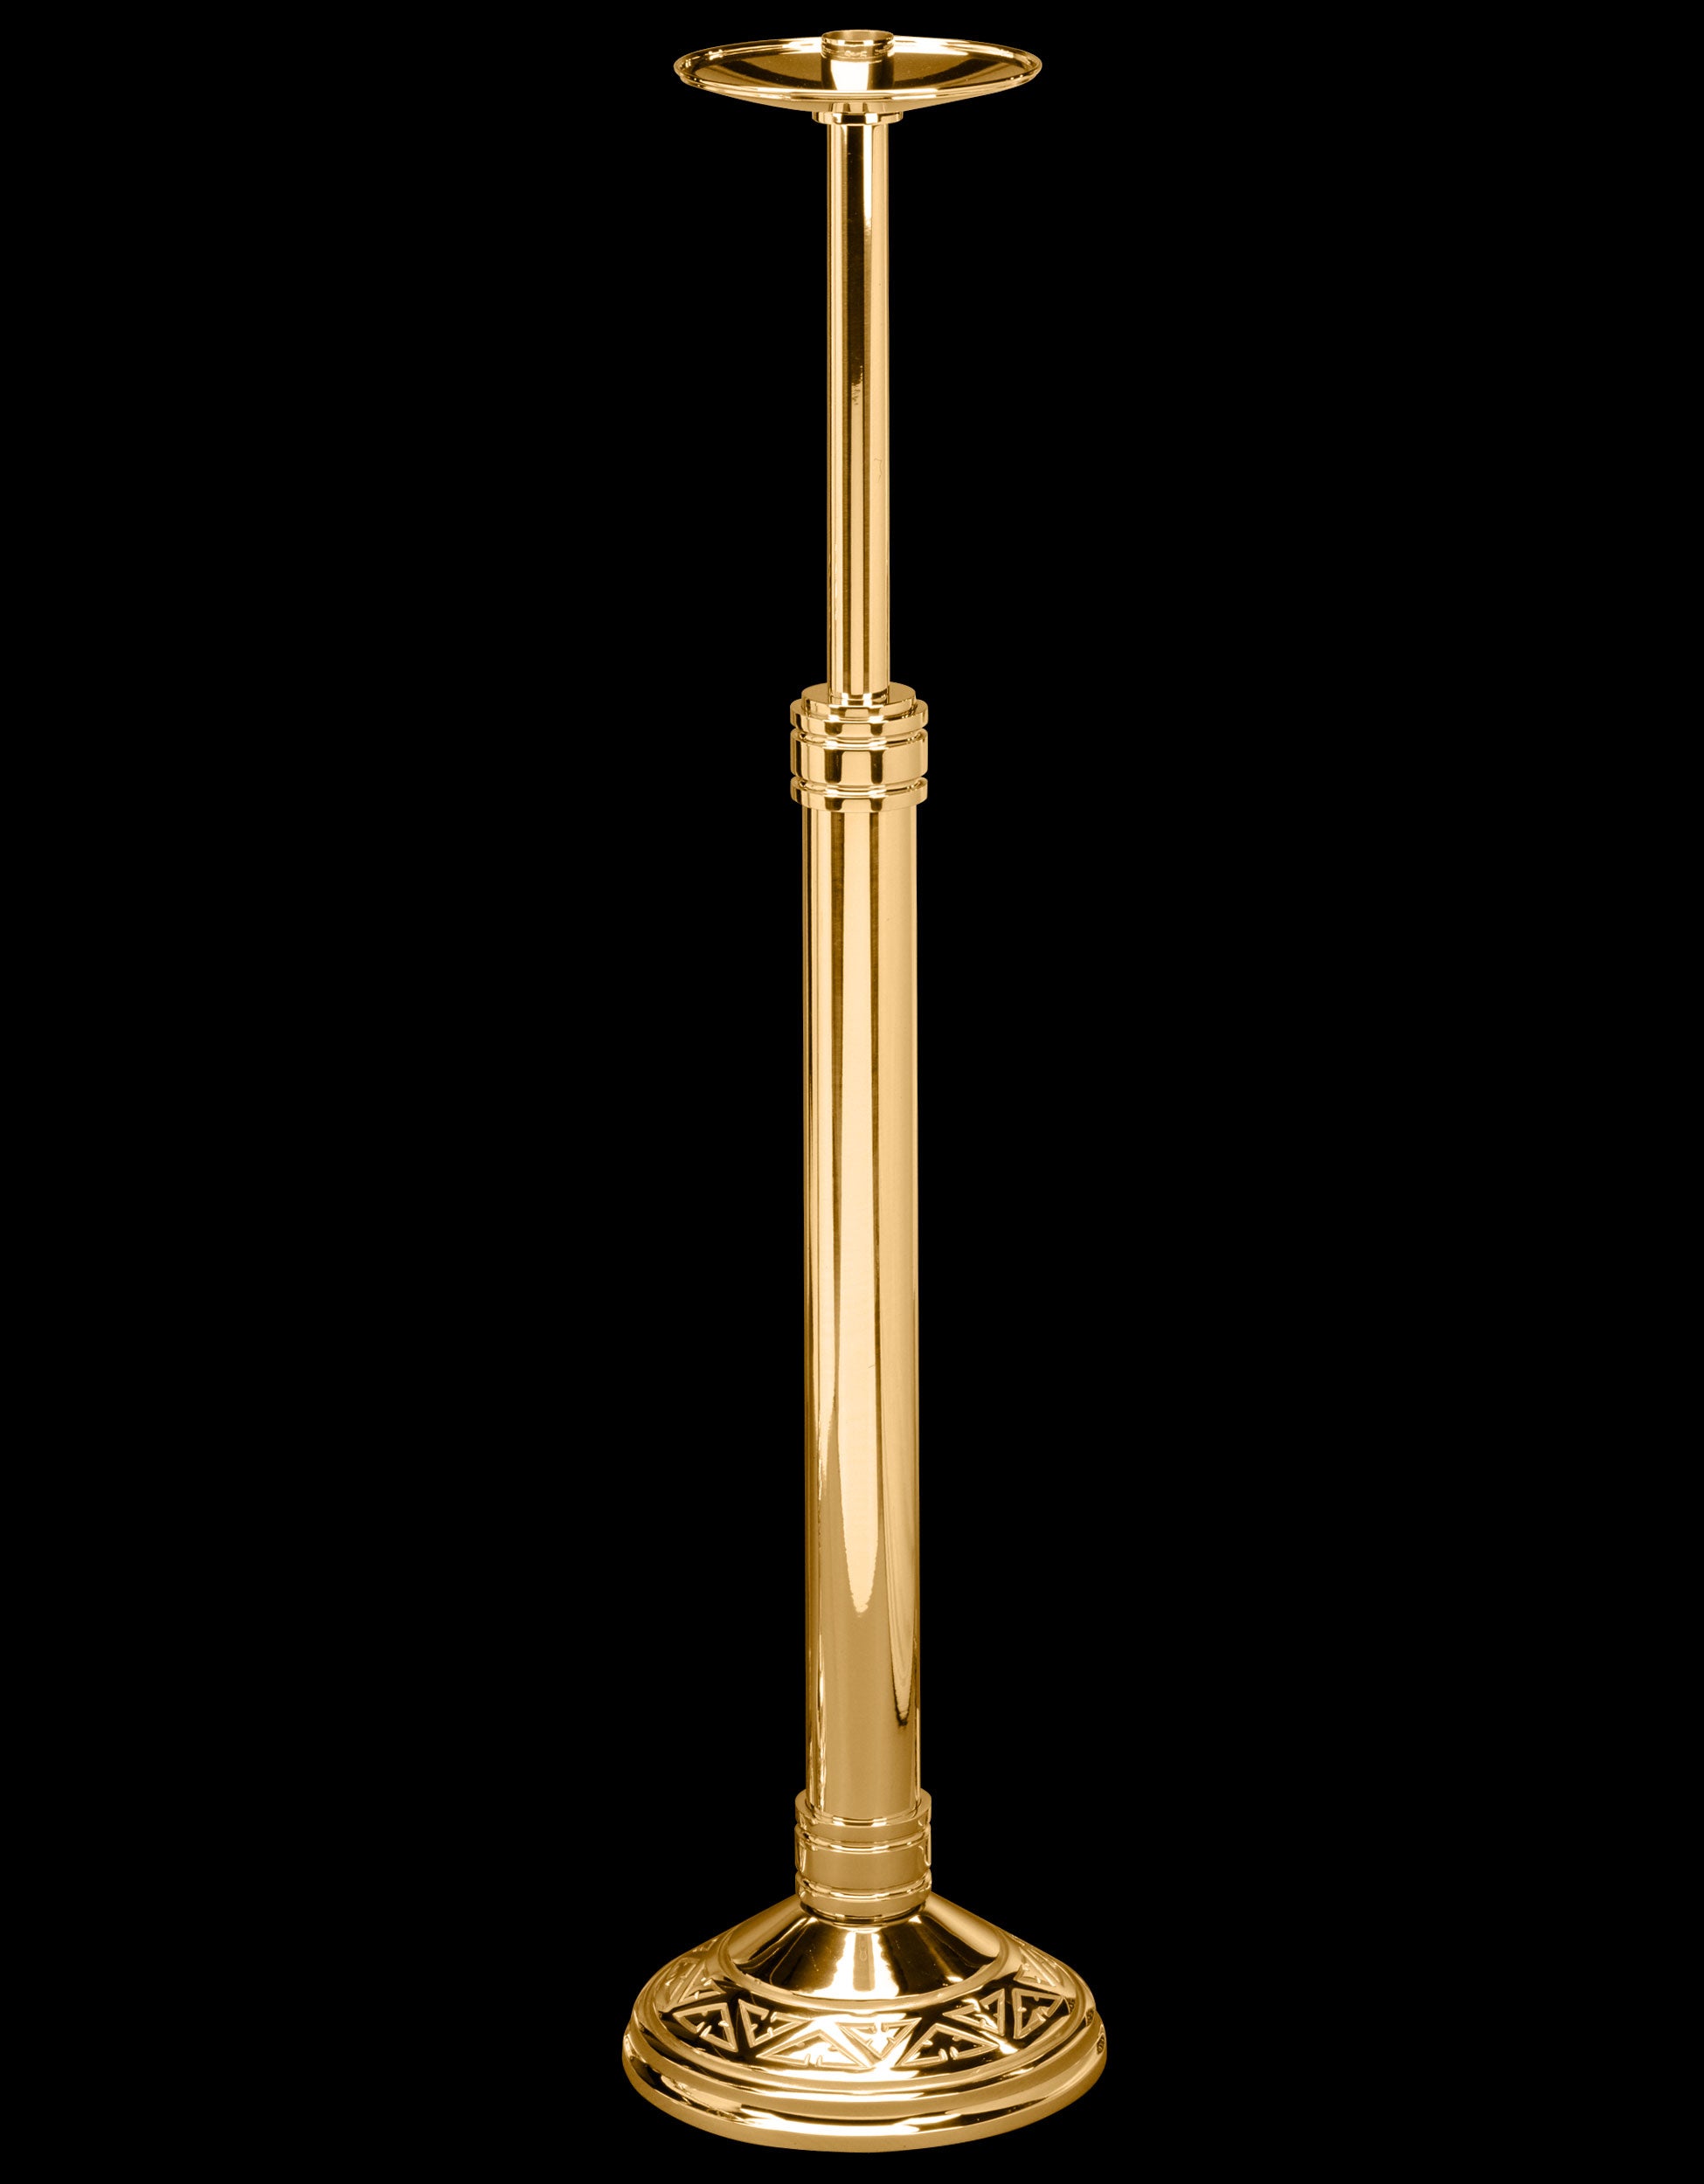 processional-torch-candlestick-240-206.jpg